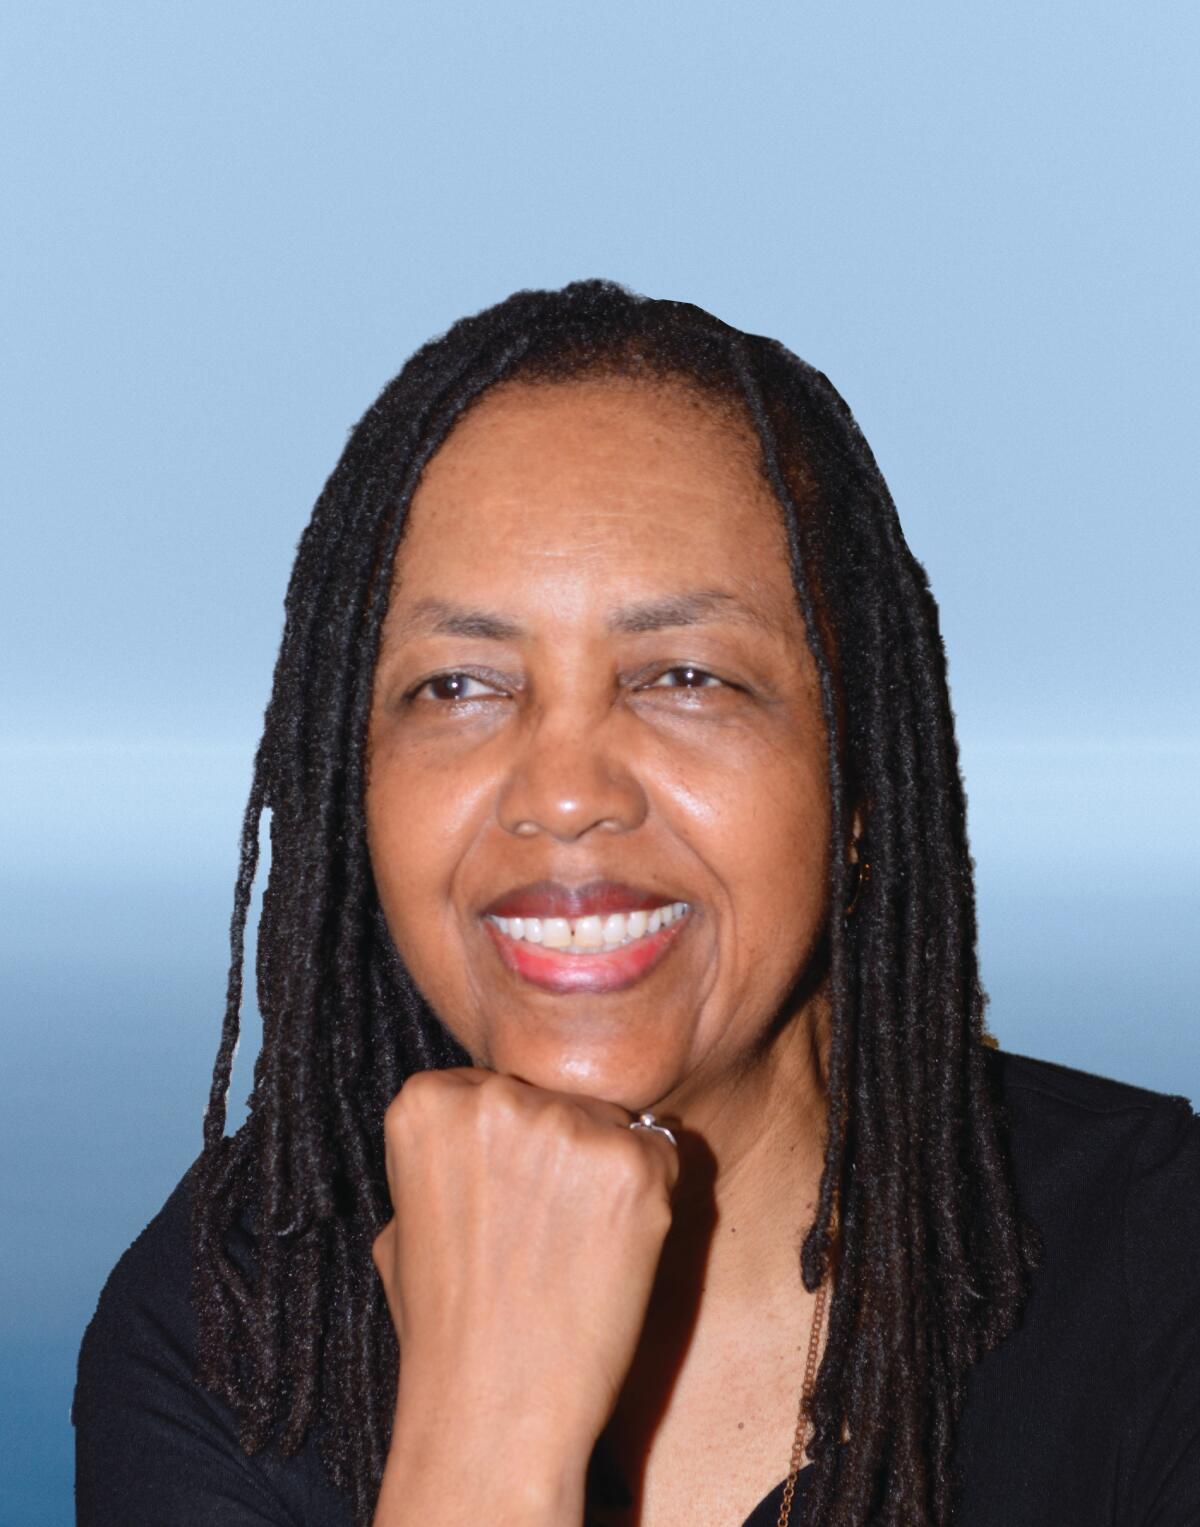 A woman with dreadlocks in a black long-sleeved shirt sits in front of a generic blue background for a portrait.